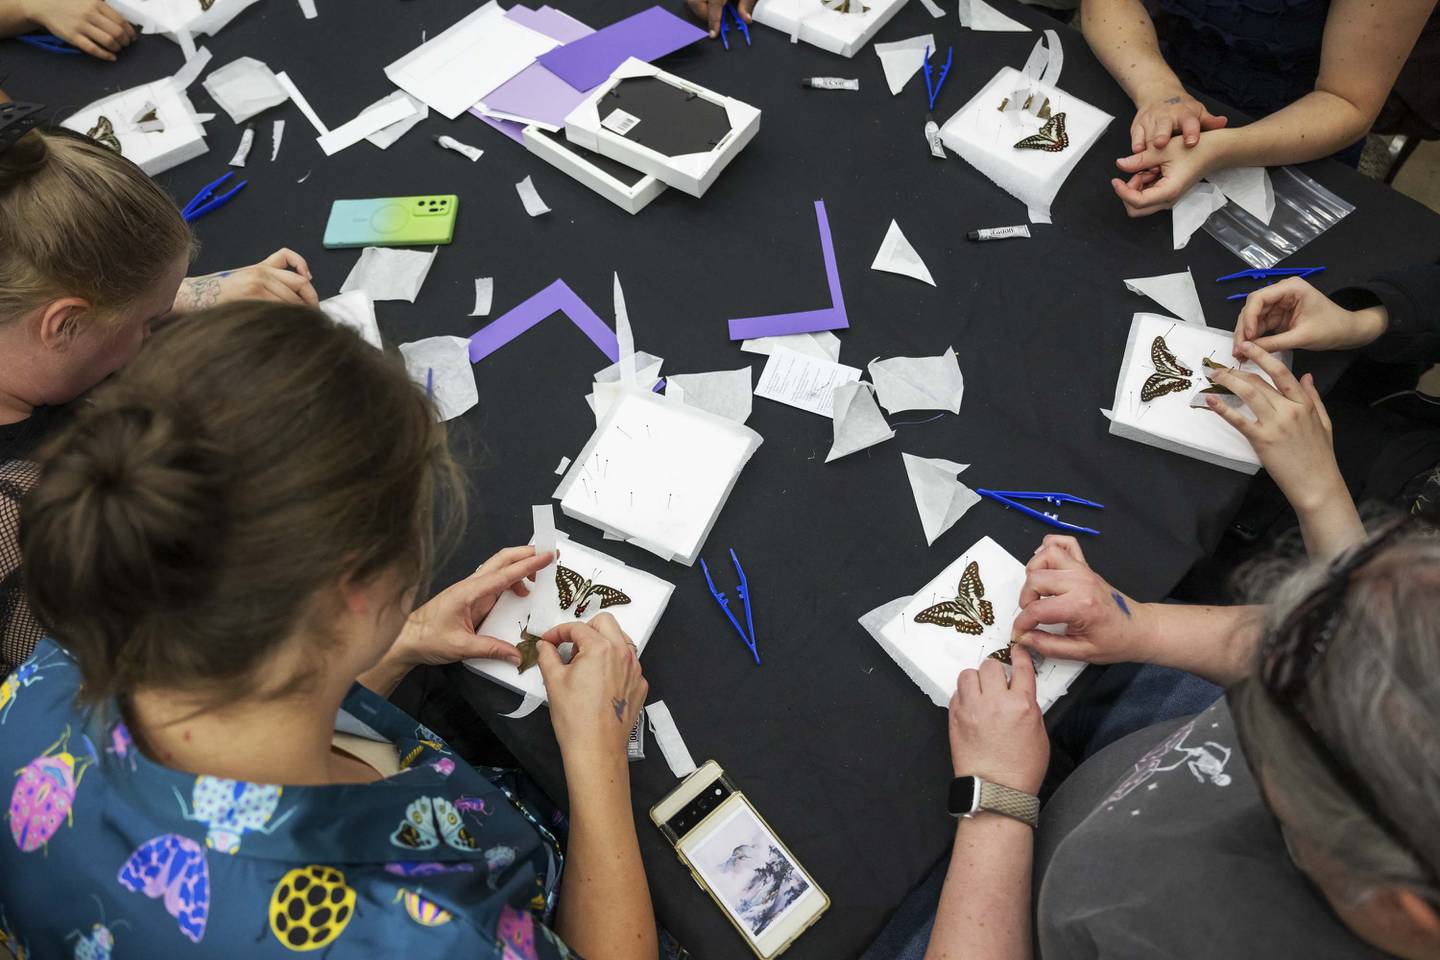 People participate in a butterfly pinning workshop during the 2023 World Oddities Expo at the Baltimore Convention Center in Baltimore, MD on October 07, 2023.